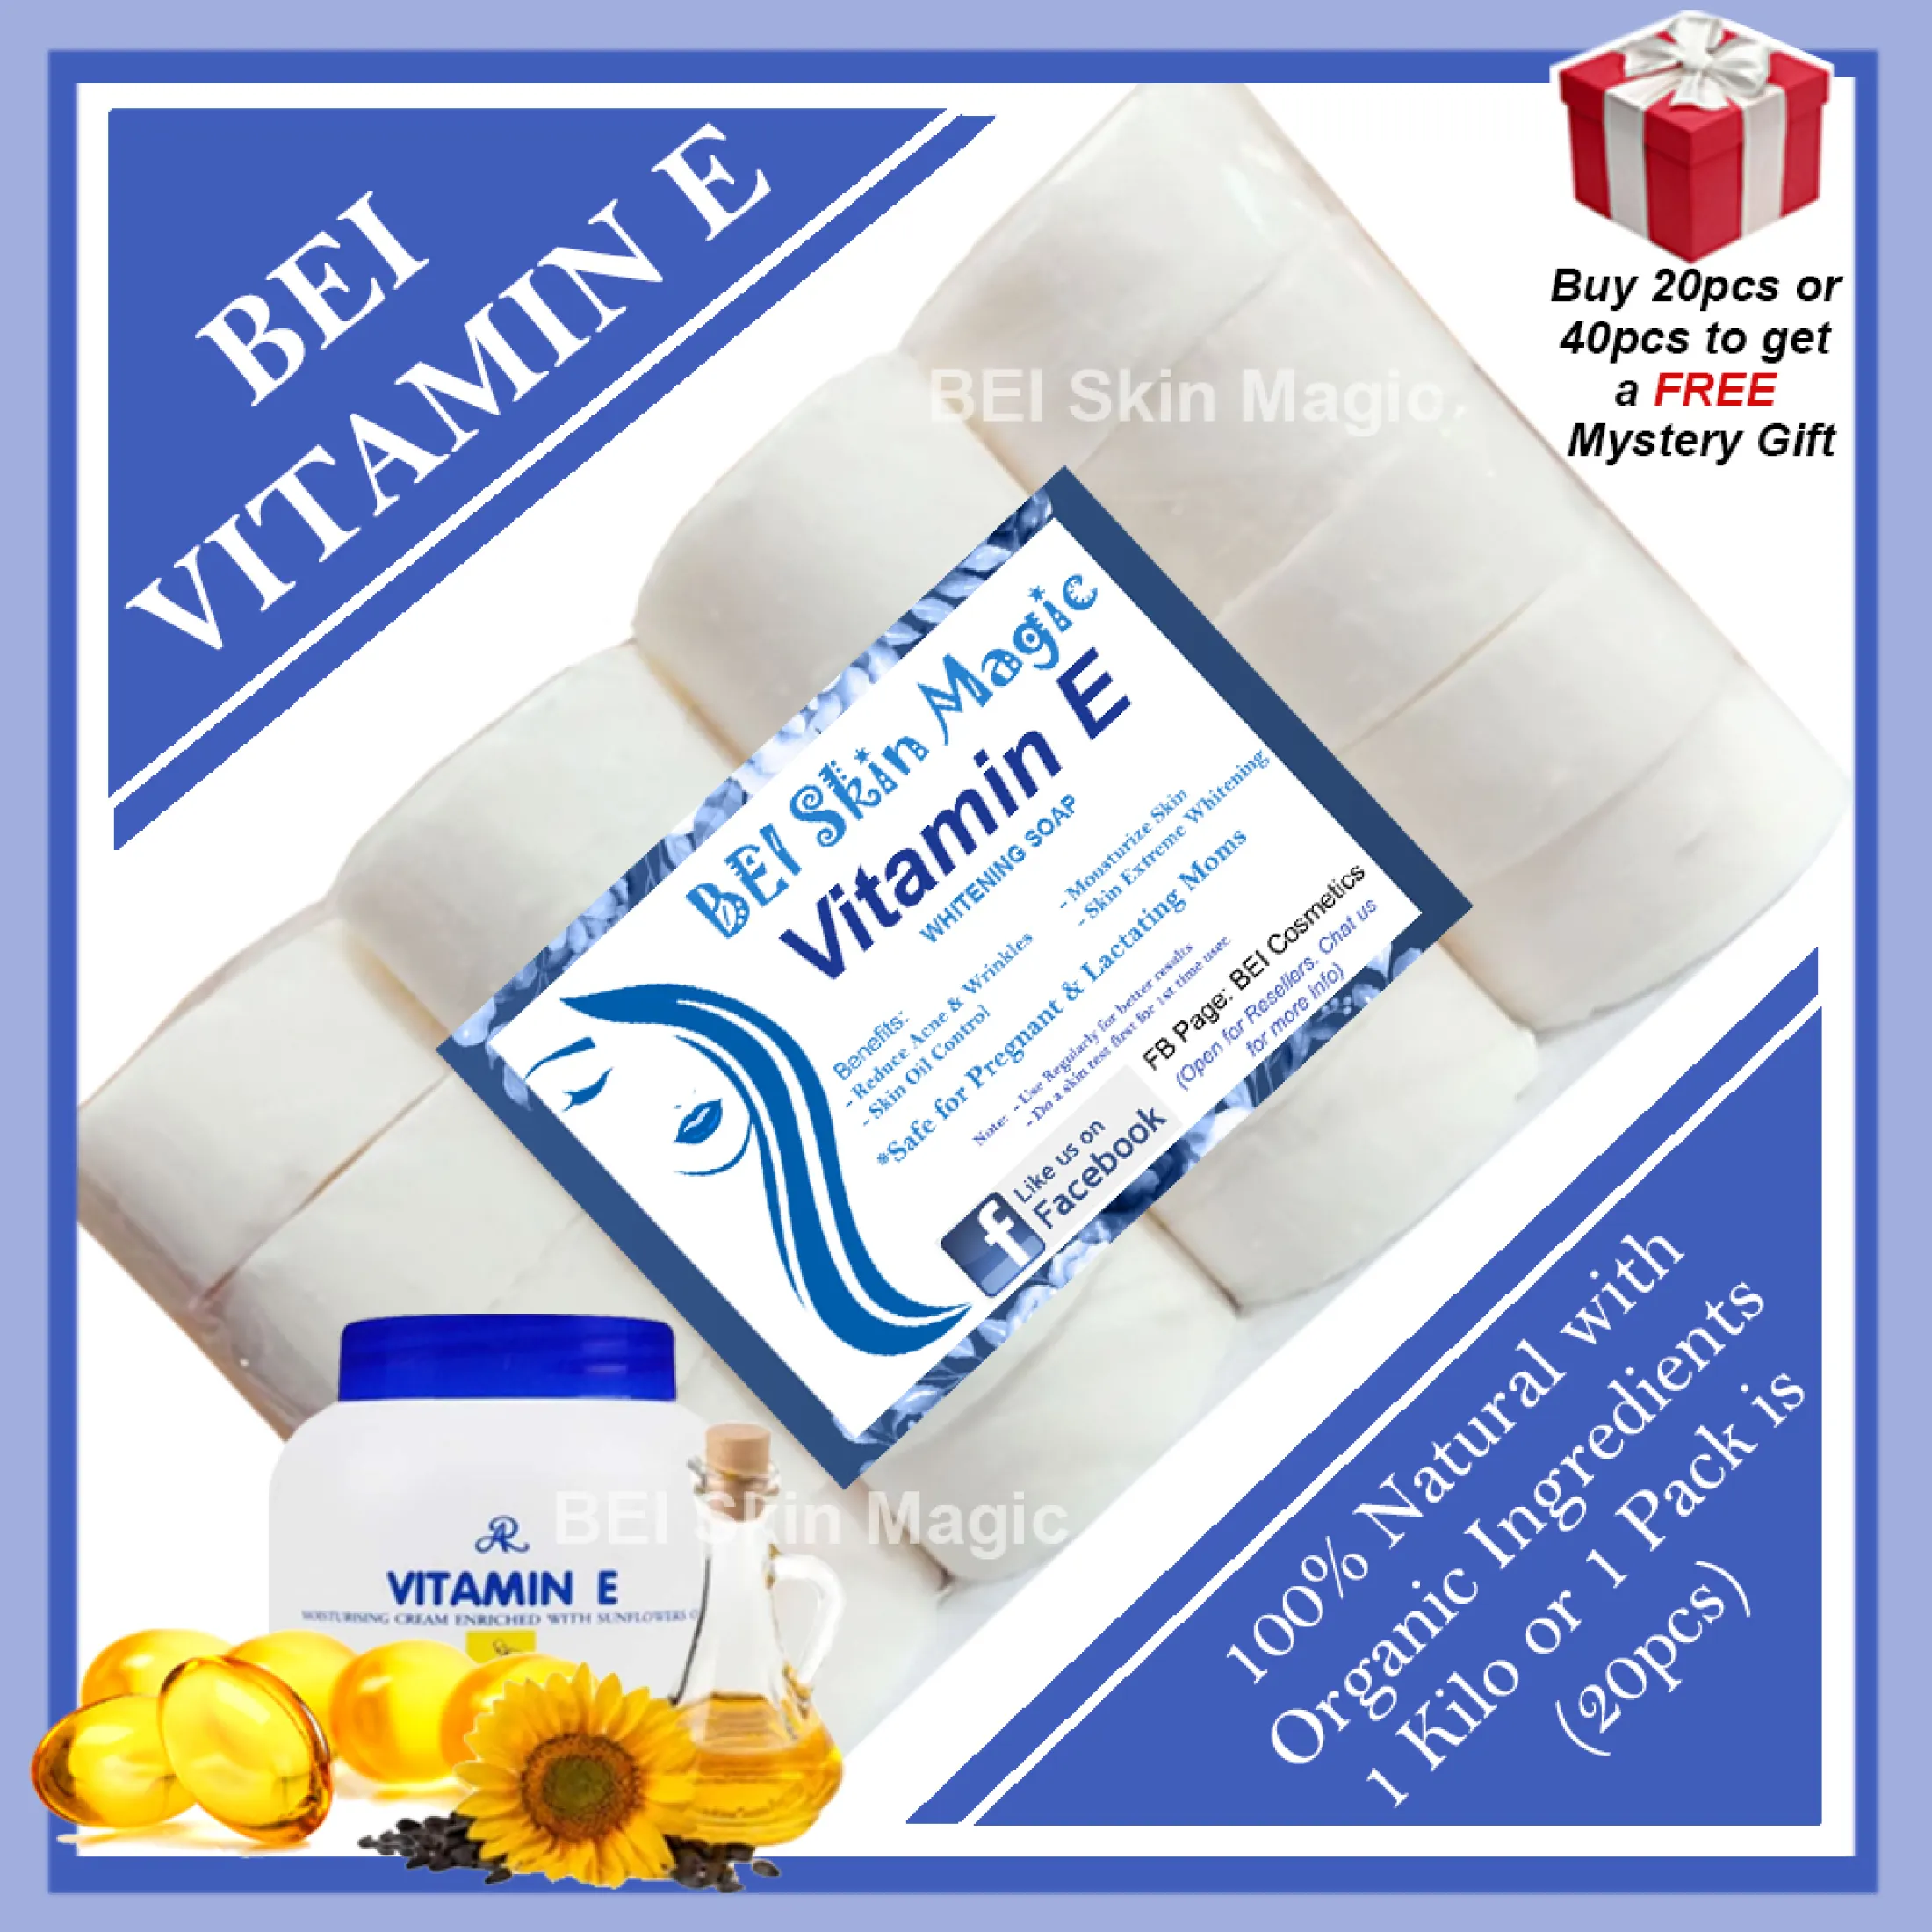 Original Vitamin E 10x Whitening With Glutathione Natural Organic Effective Whitening Round Bar Beauty Soap Skin Care Womens Mens Care Beauty Tools Personal With Variation